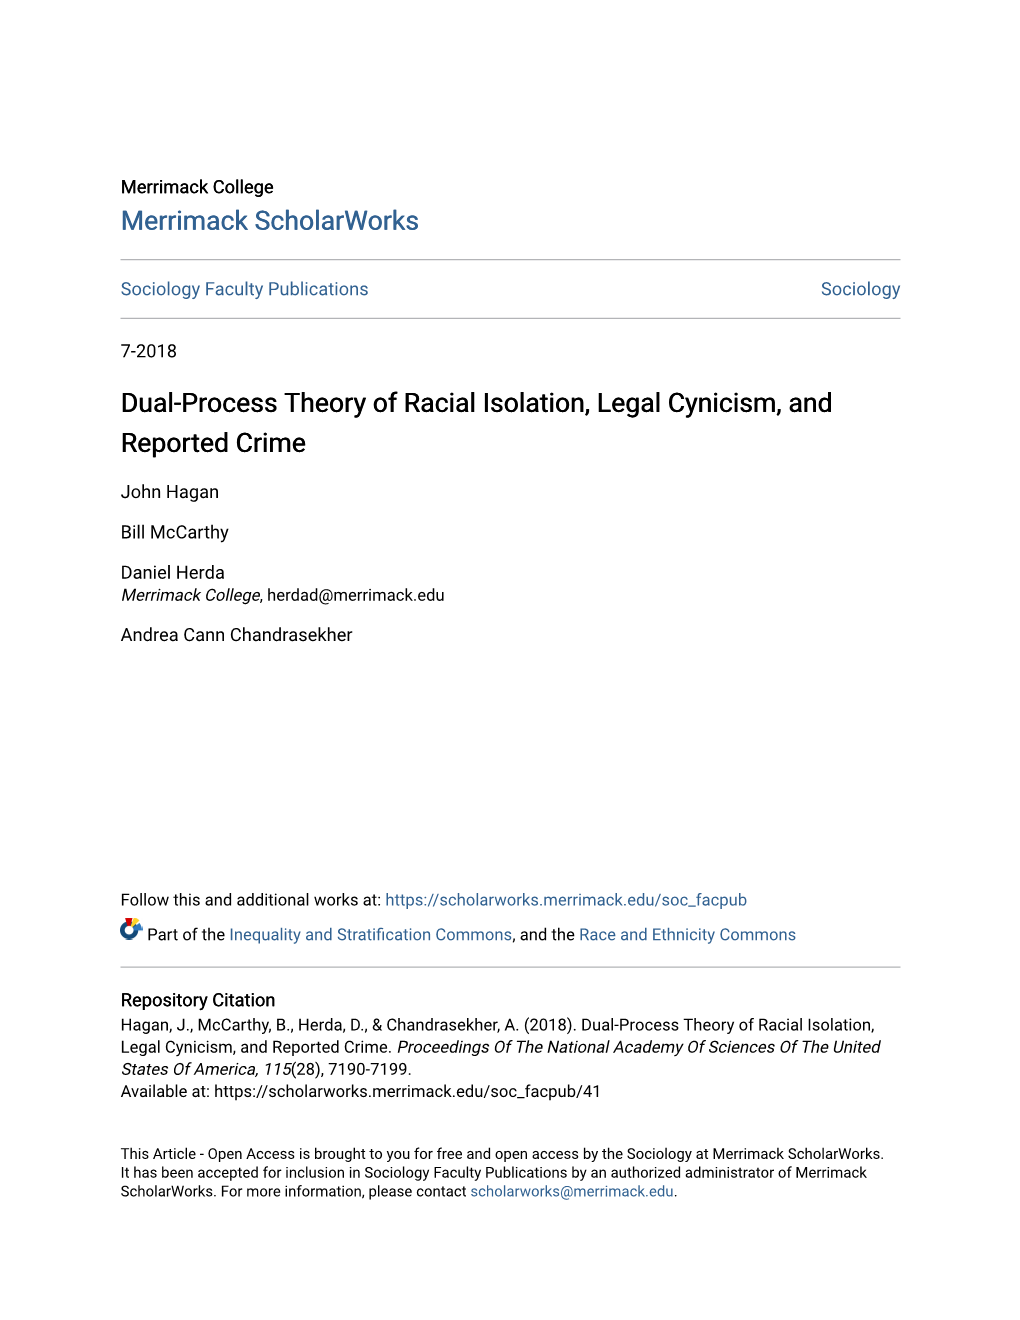 Dual-Process Theory of Racial Isolation, Legal Cynicism, and Reported Crime